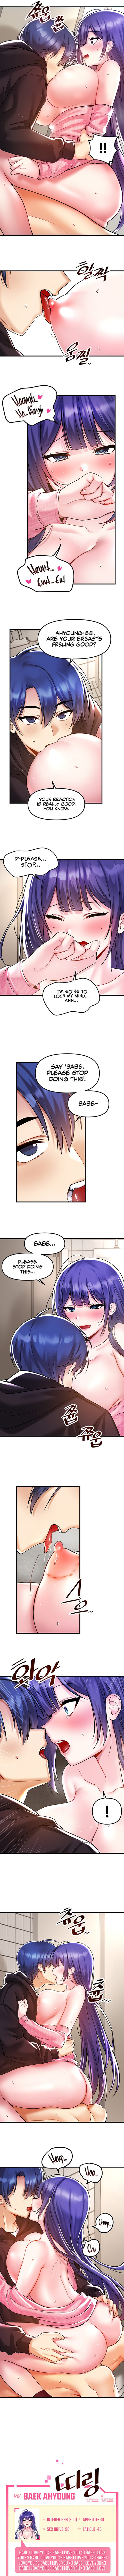 trapped-in-the-academys-eroge-chap-39-3